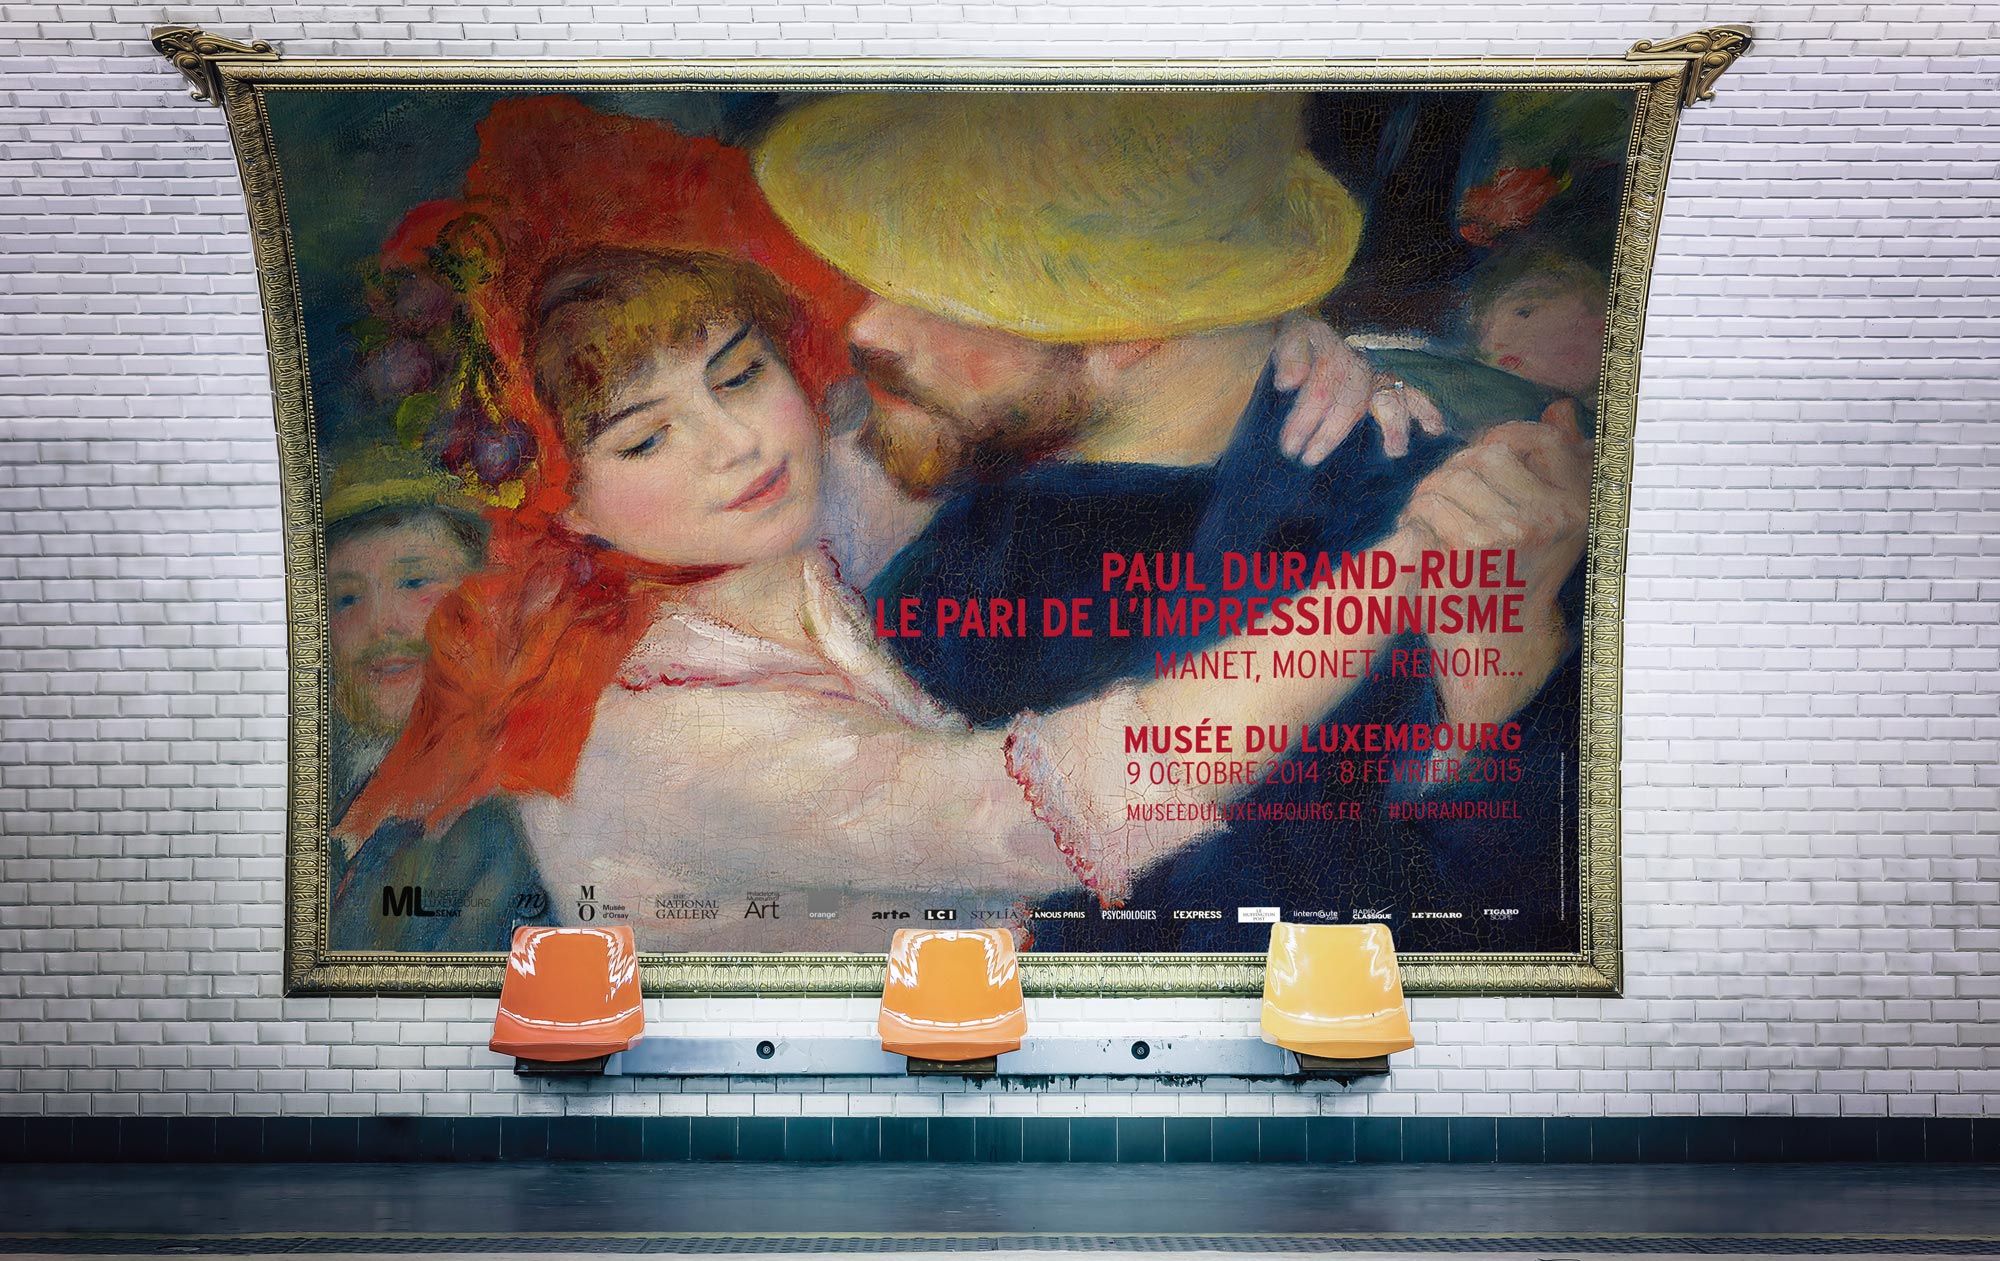 Musee du Luxembourg Exposition communication Paul Durand-Ruel Affichage metro